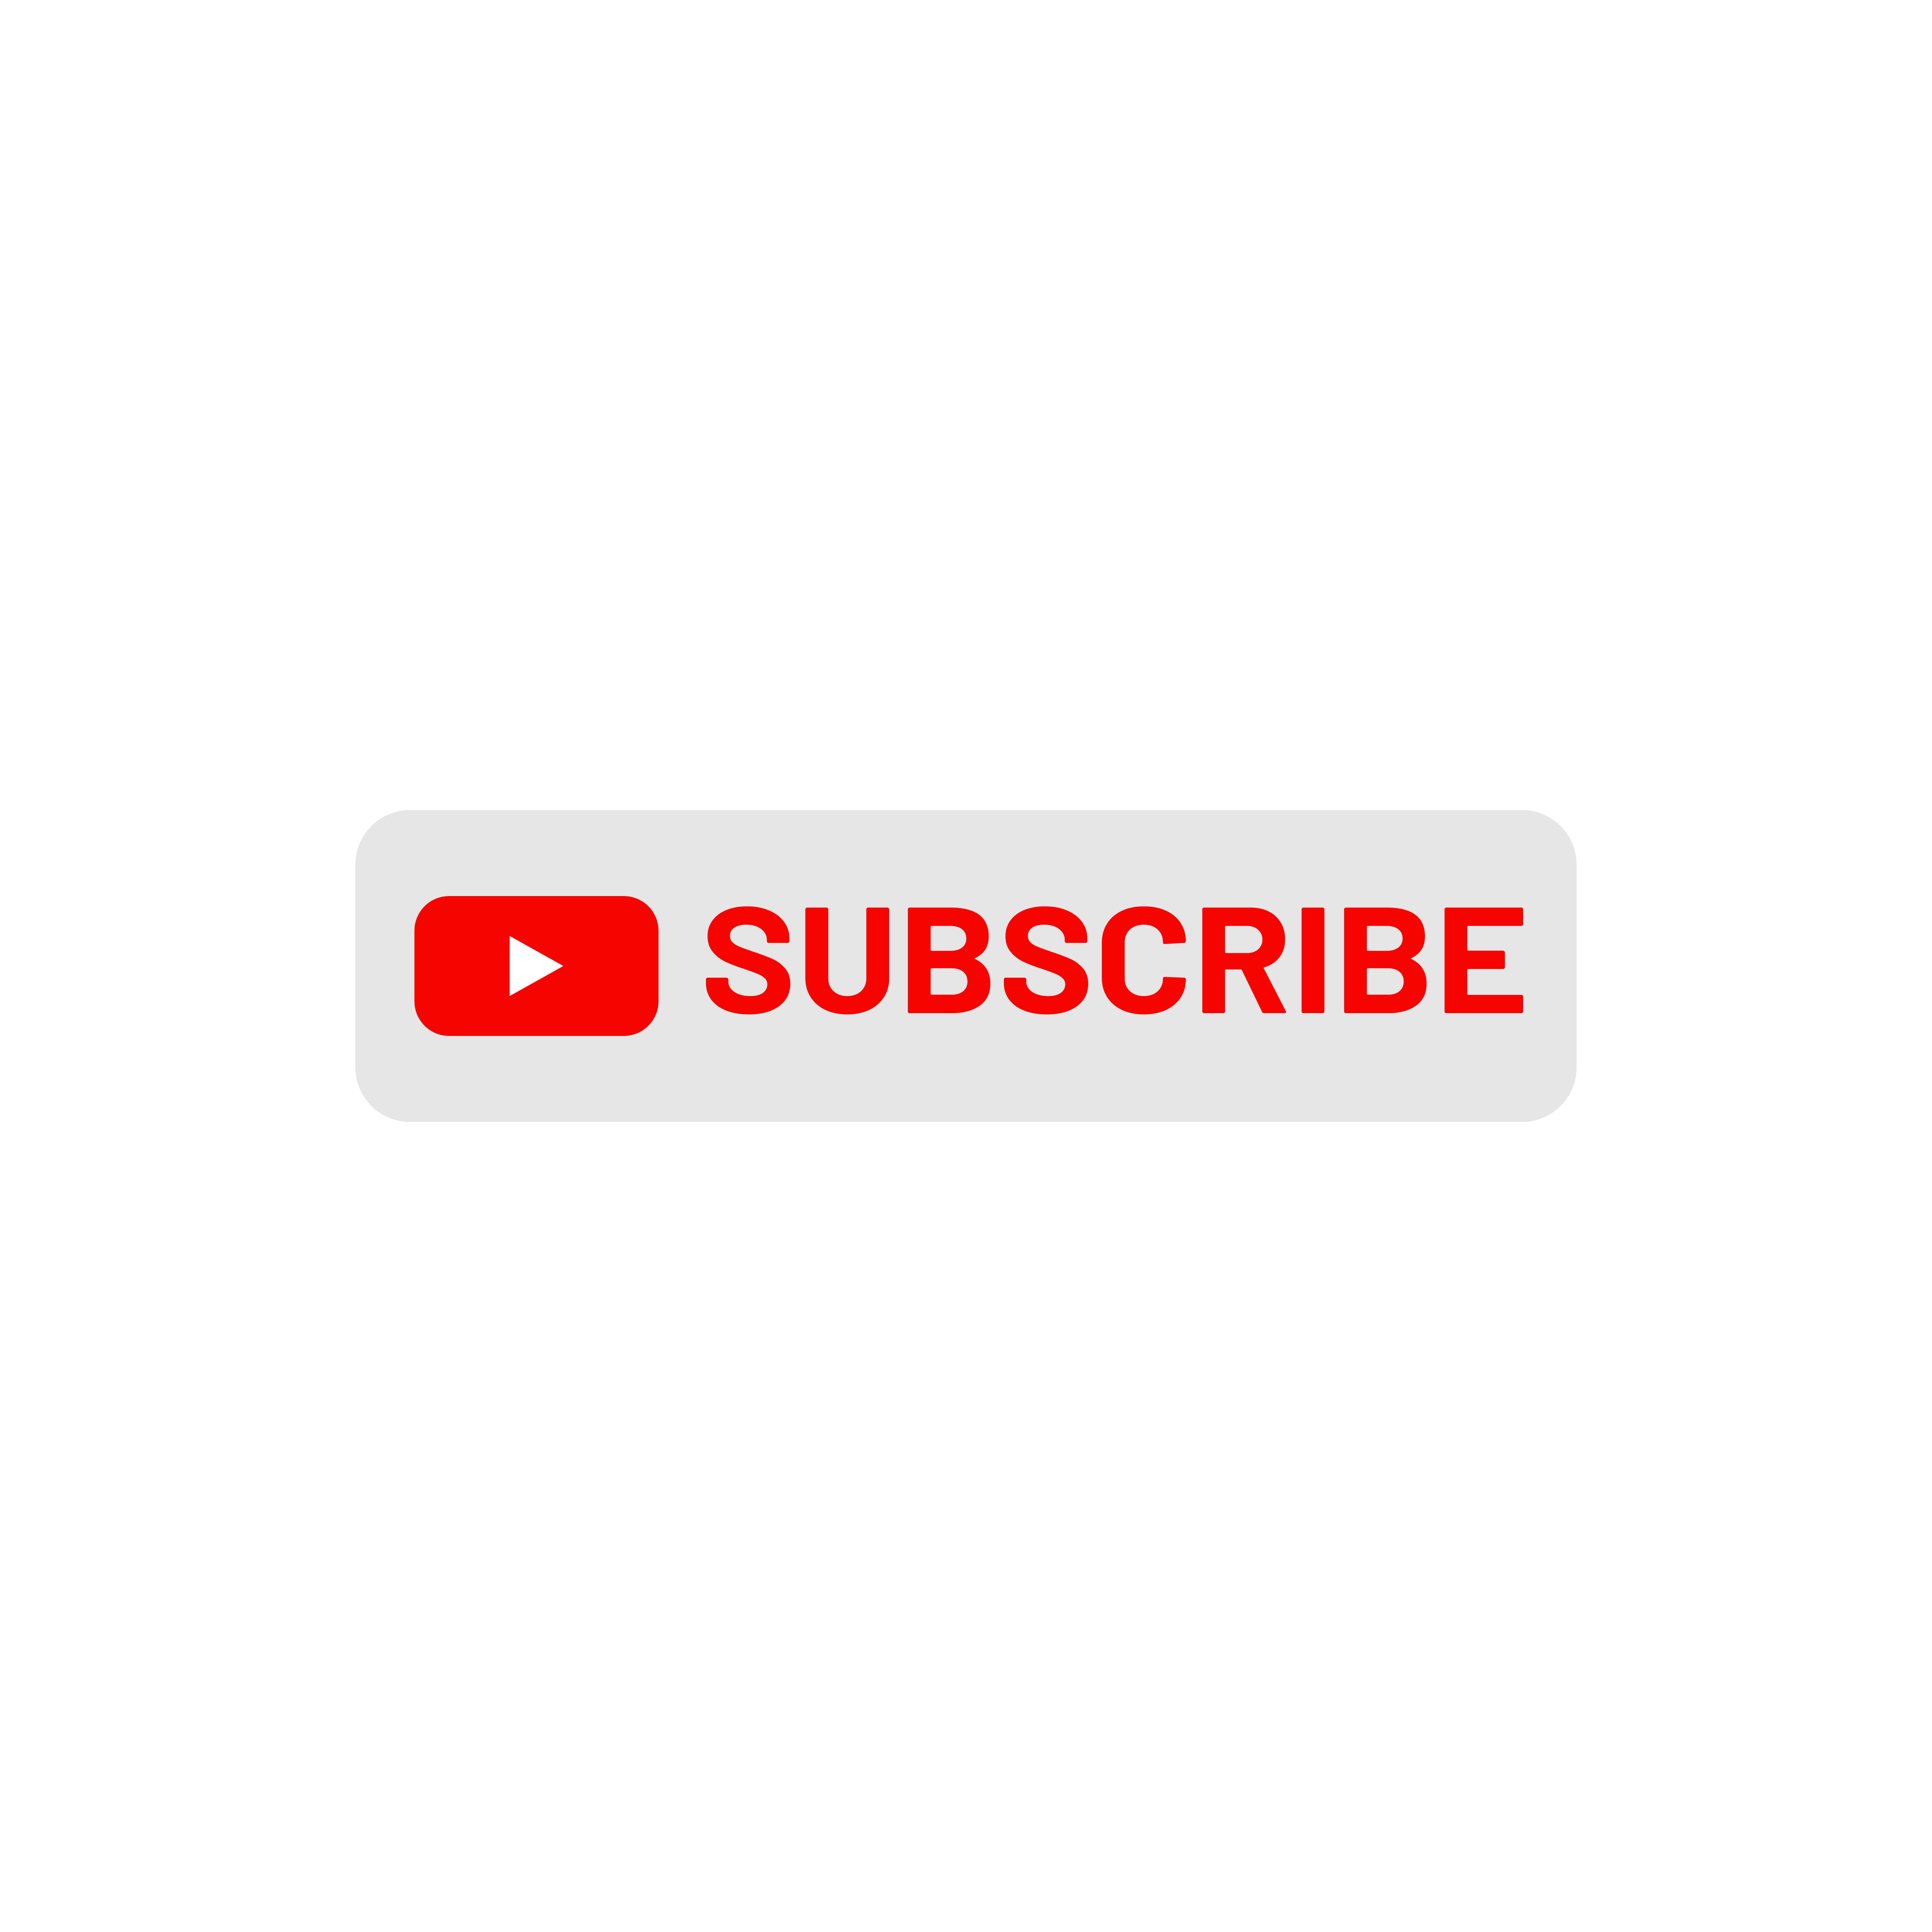 subscribe button png